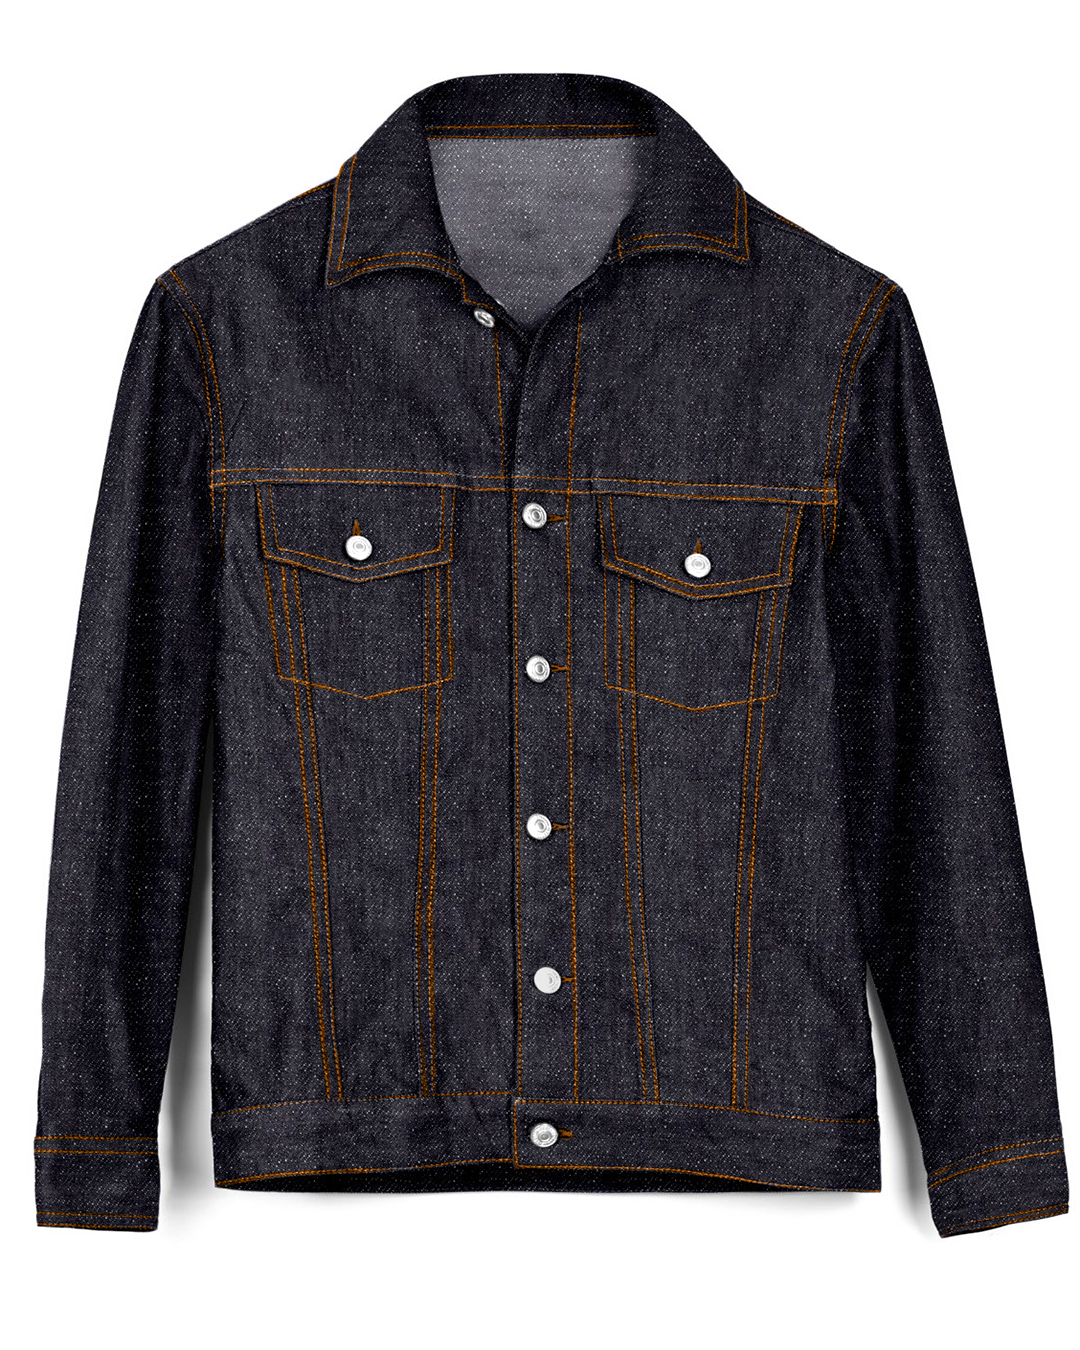 Front of the denim jacket for men by Luxire in dark blue